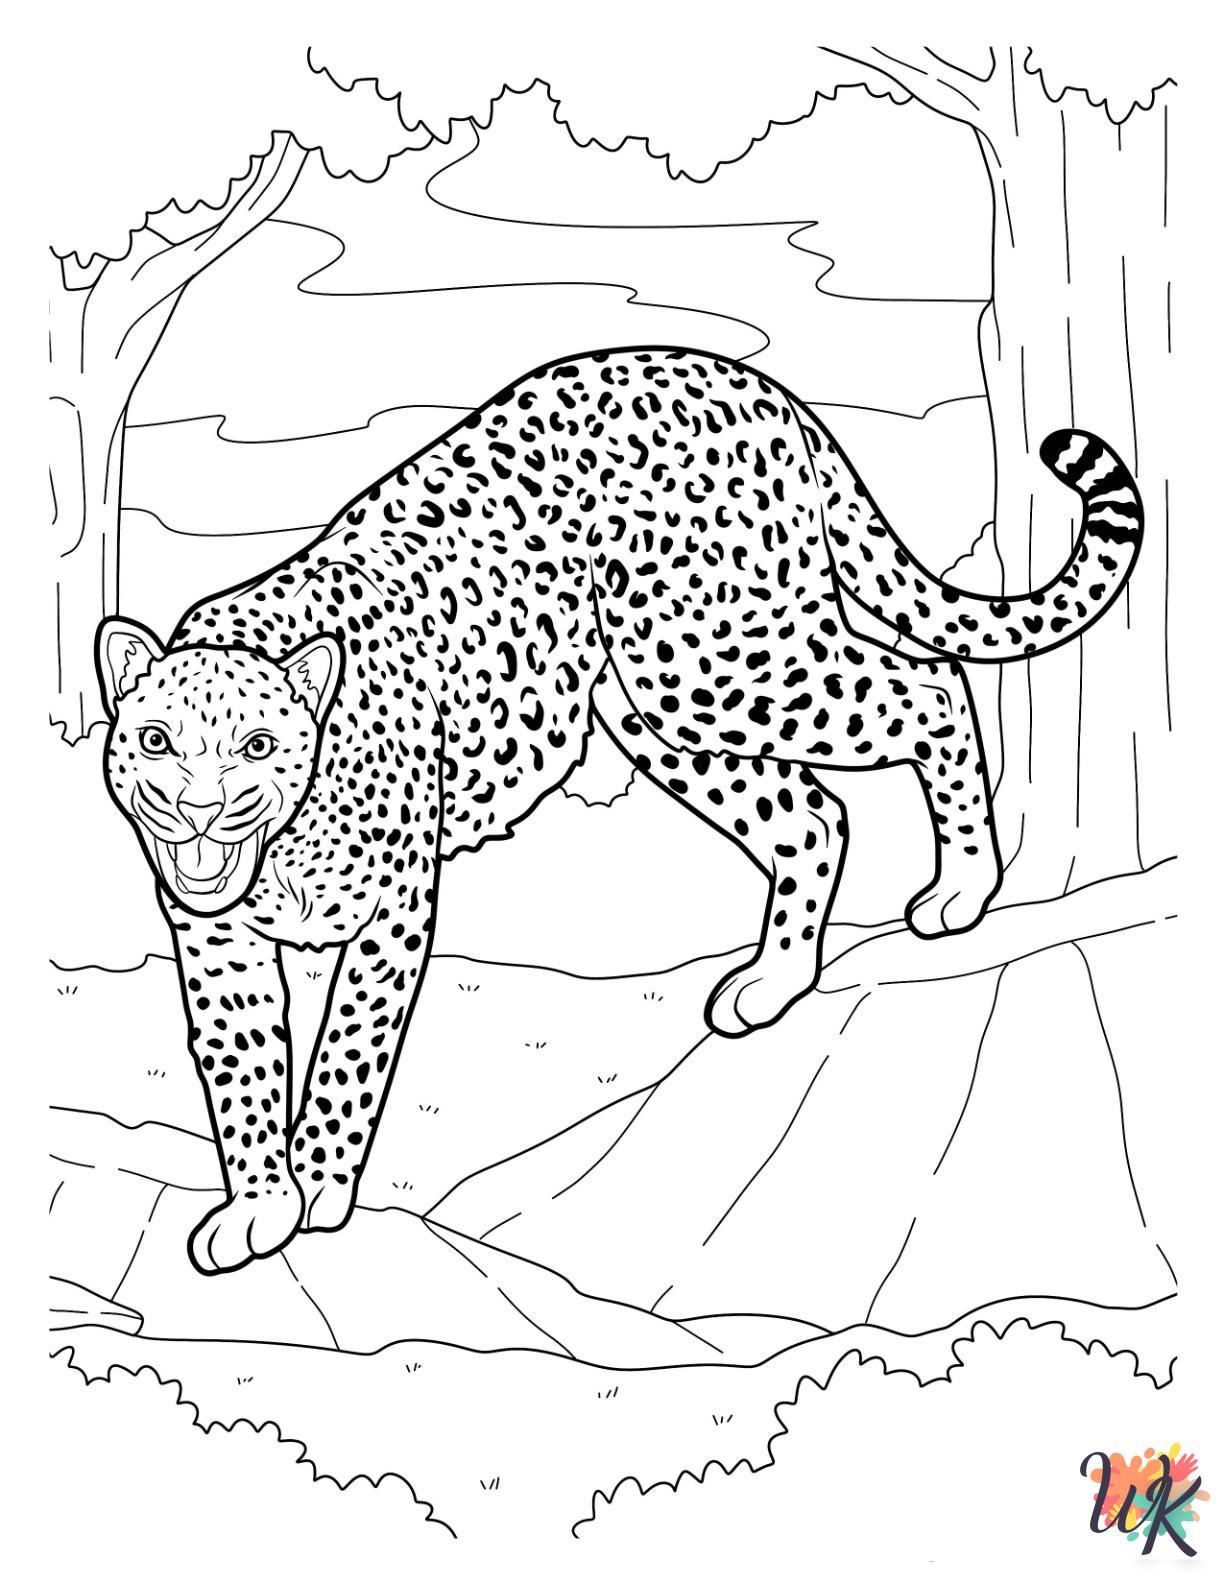 Cheetah coloring pages for adults 1